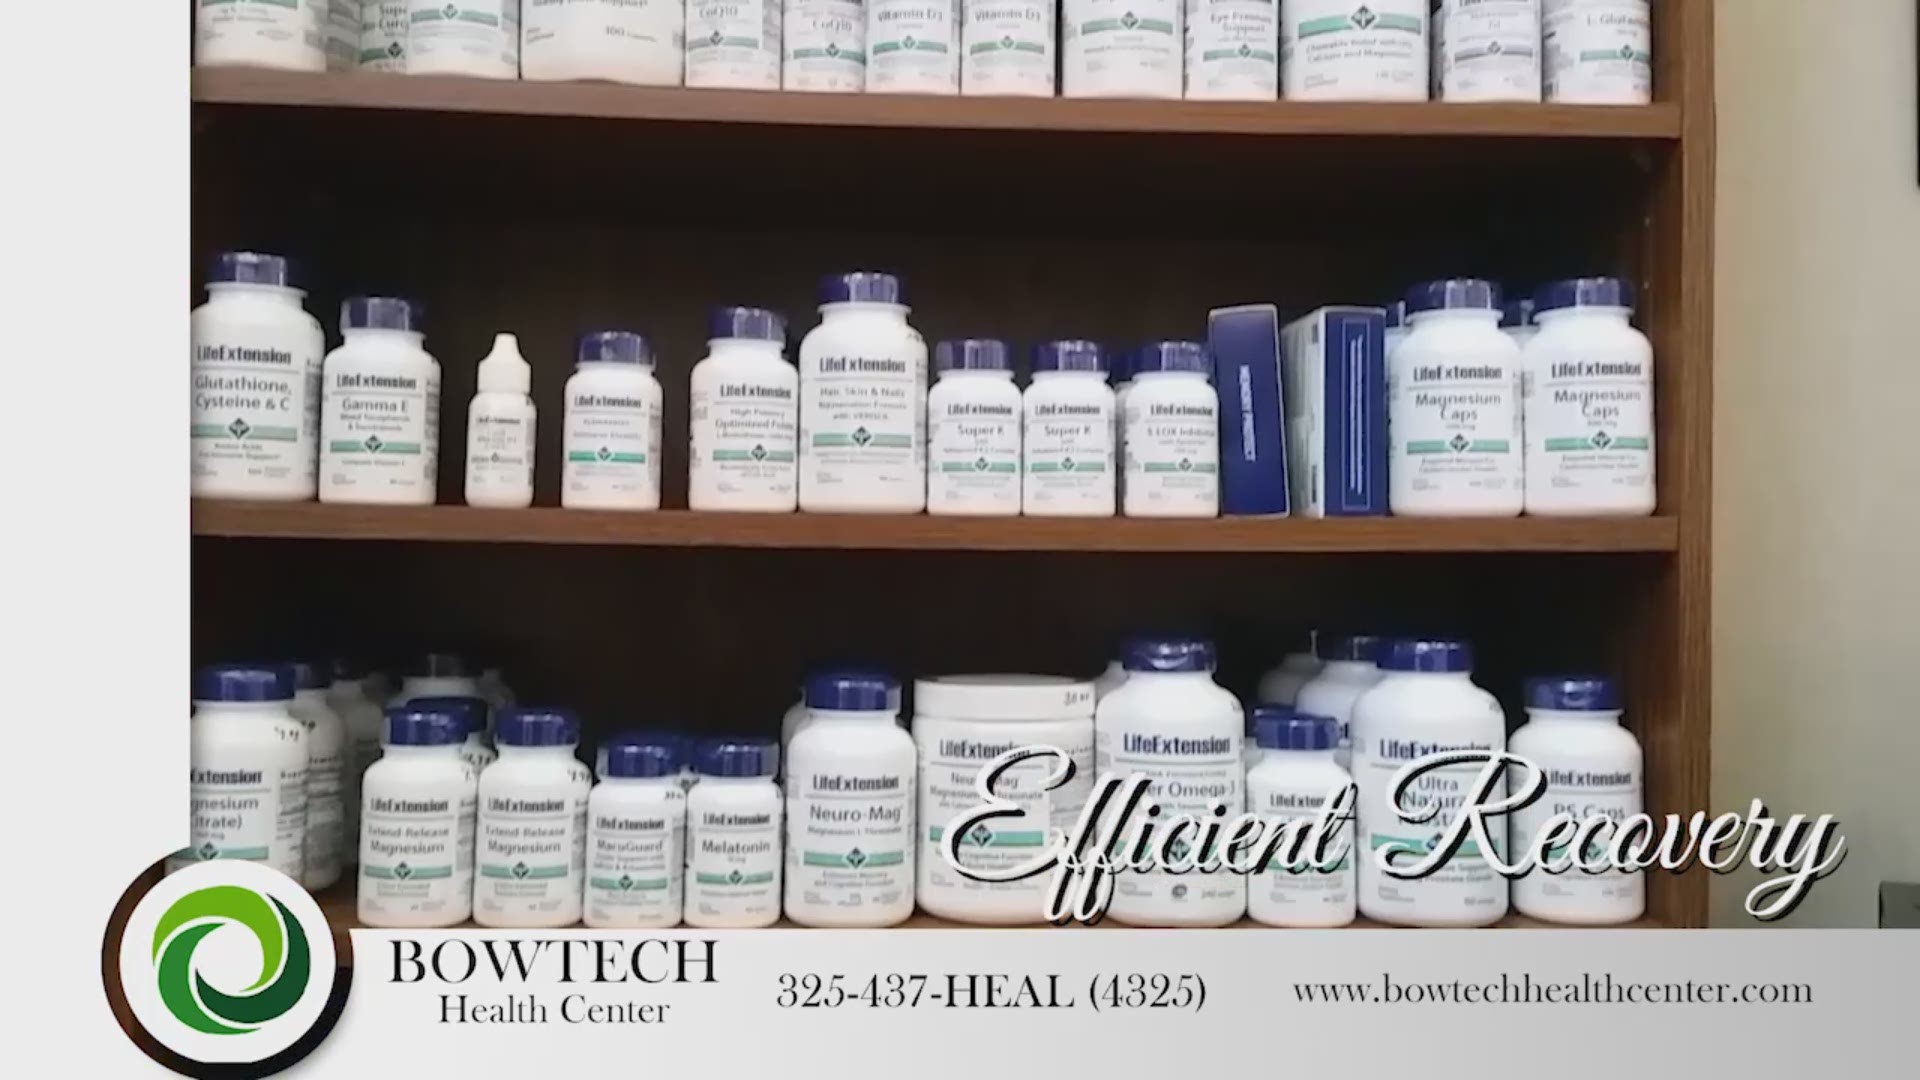 Bowtech - Bowenwork and holistic nutrition can help increase success of surgeries and promote speedy recovery